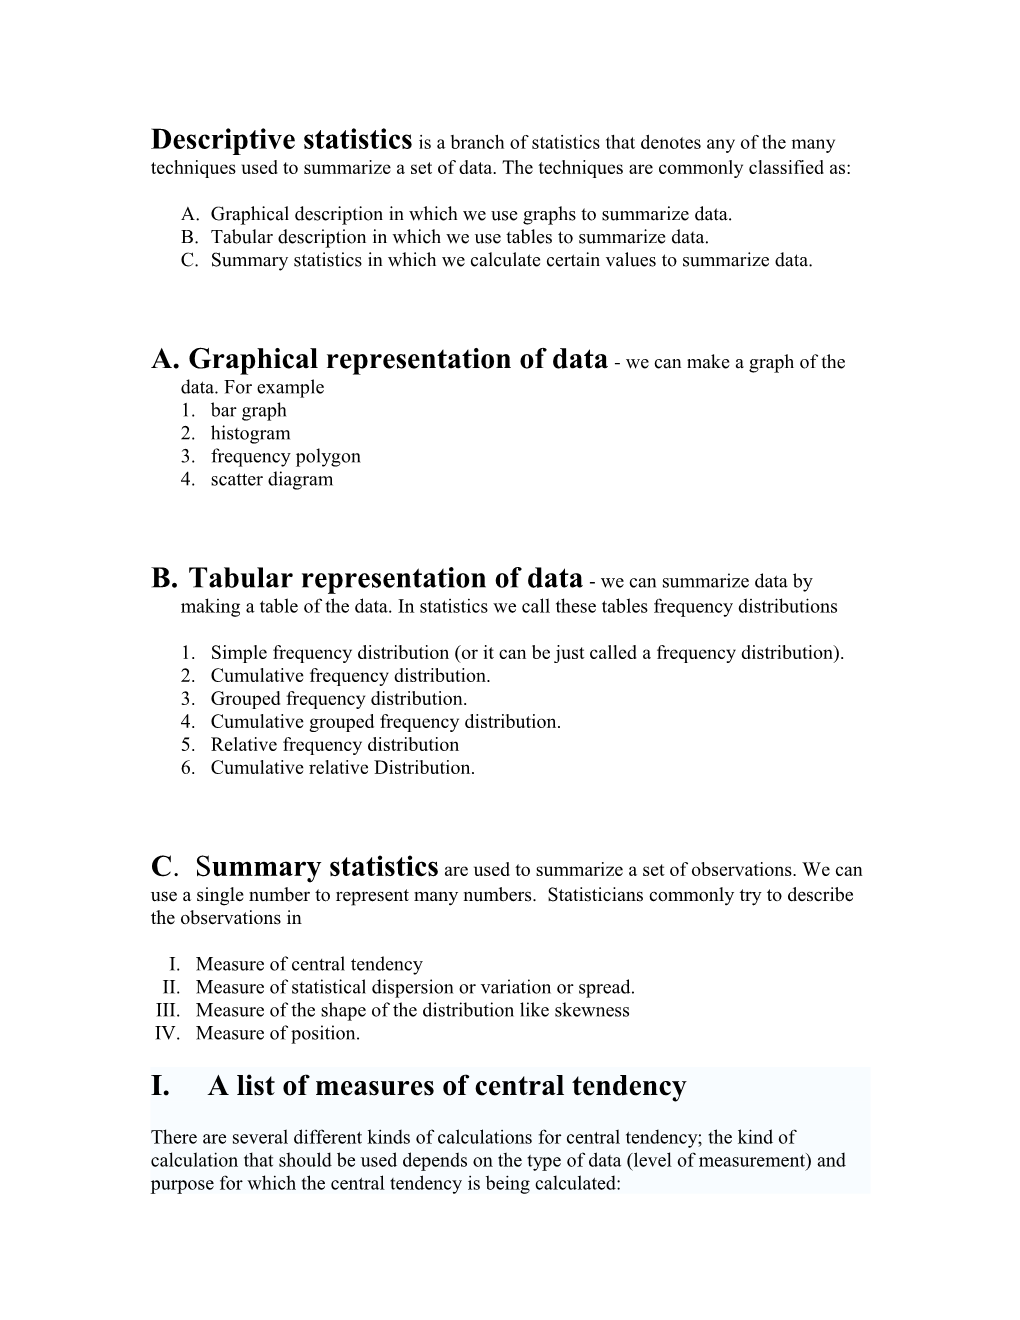 Descriptive Statistics Is a Branch of Statistics That Denotes Any of the Many Techniques